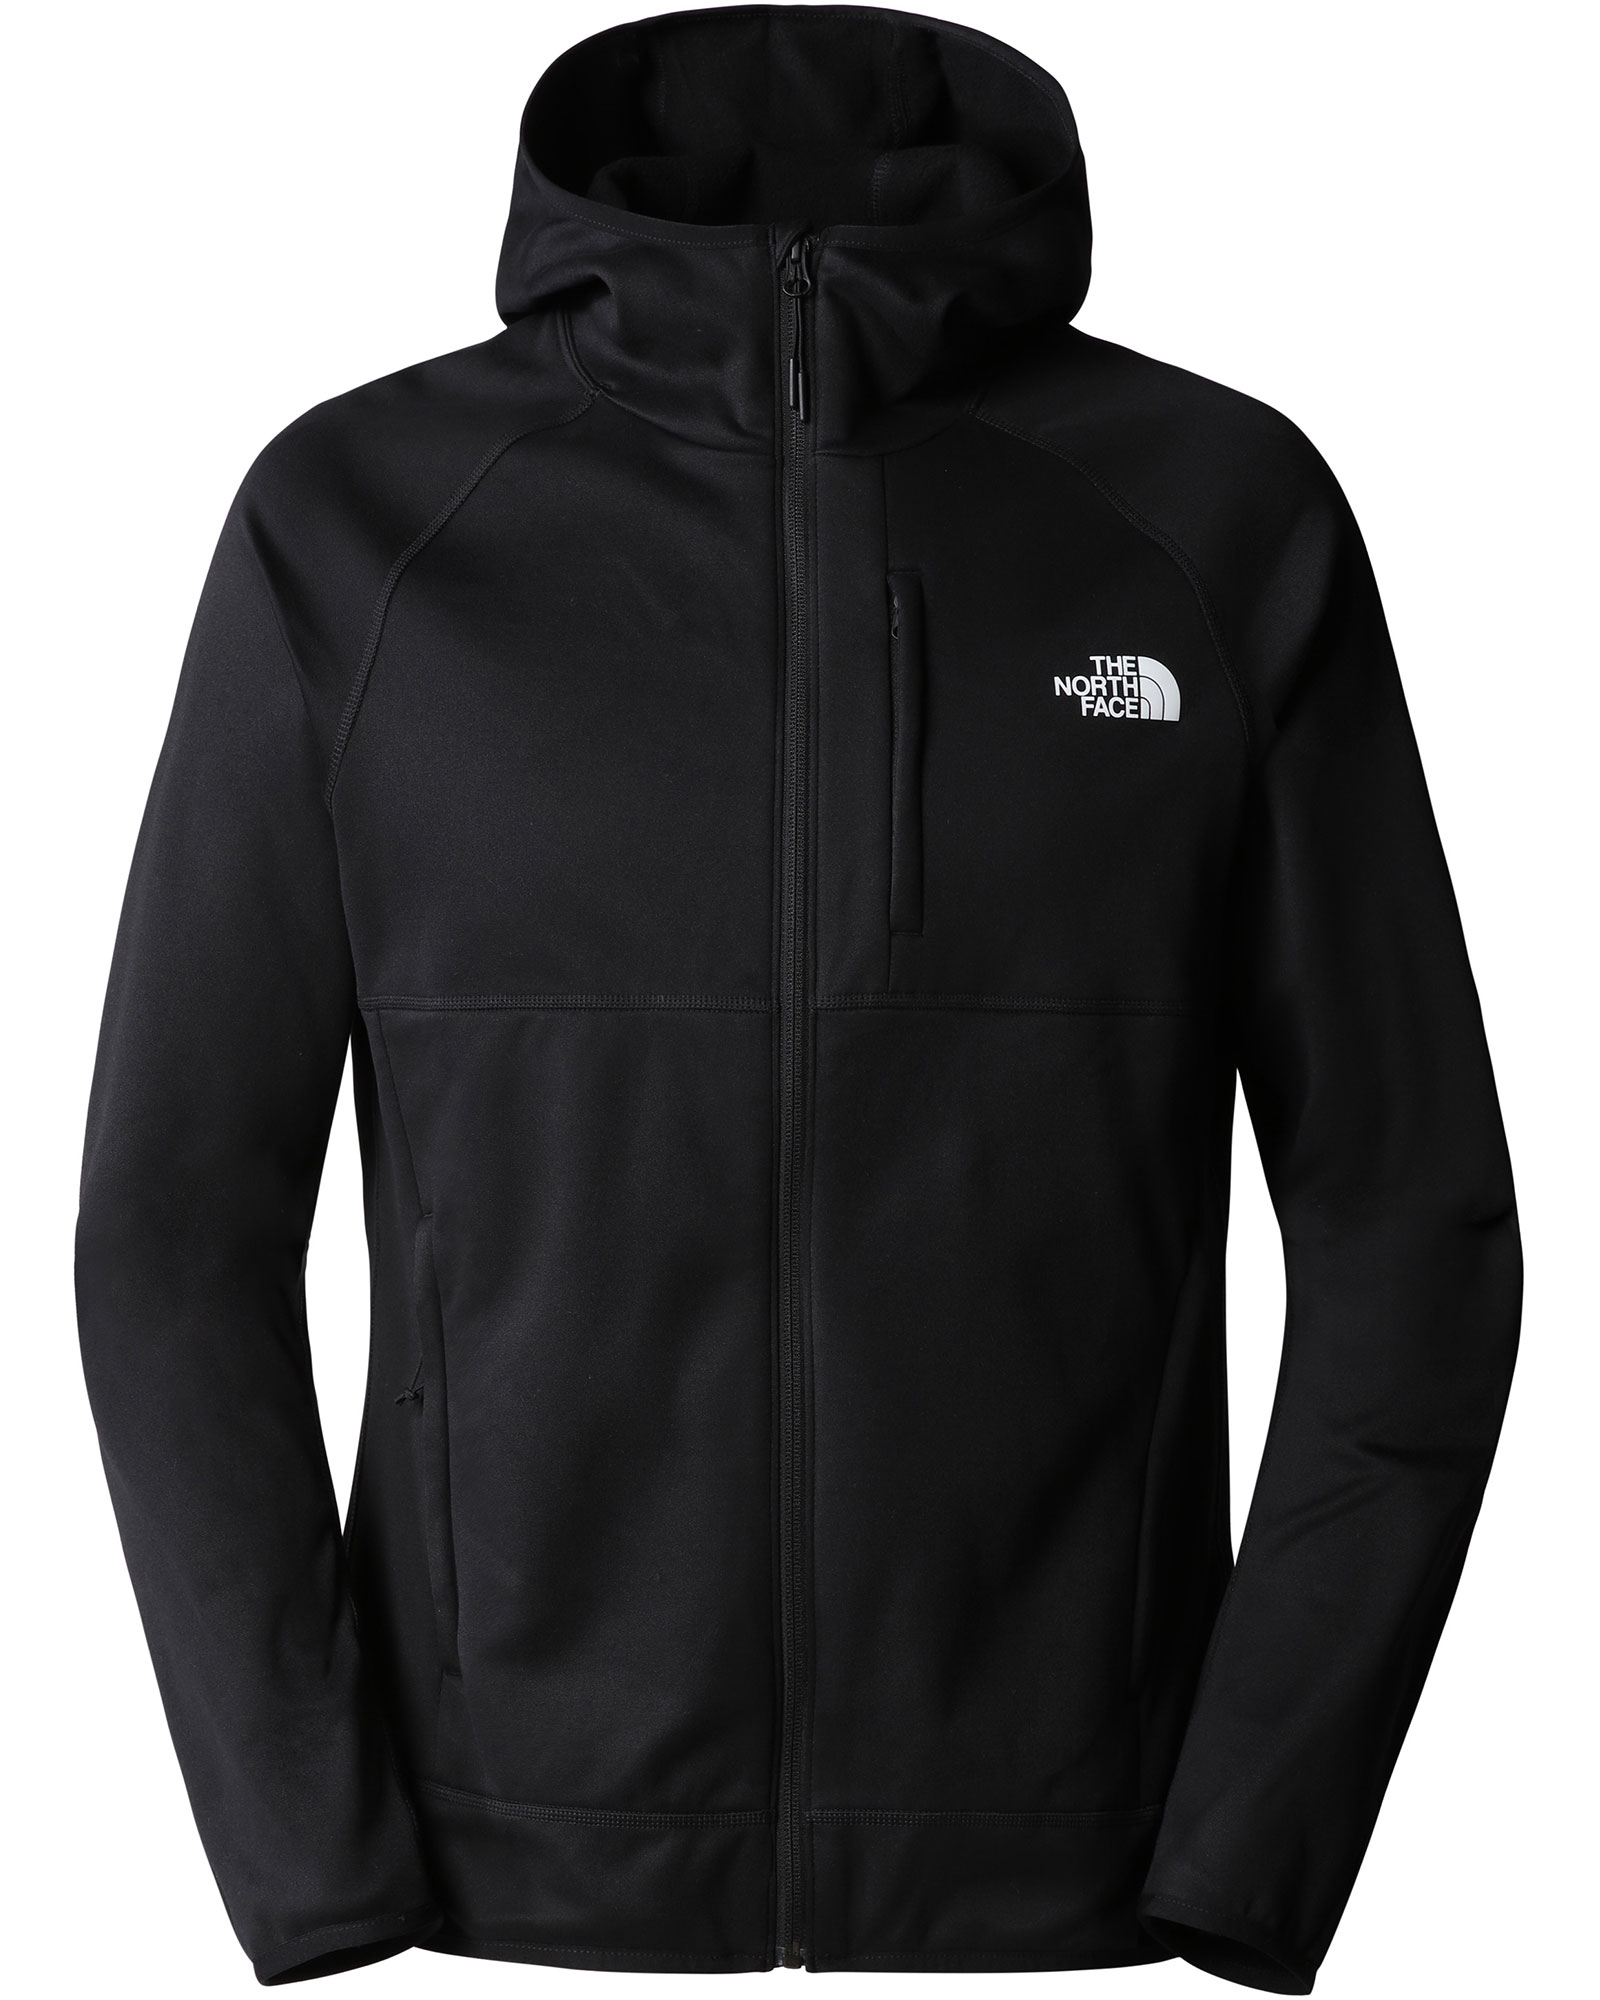 The North Face Canyonlands Men’s Hoodie - TNF Black S